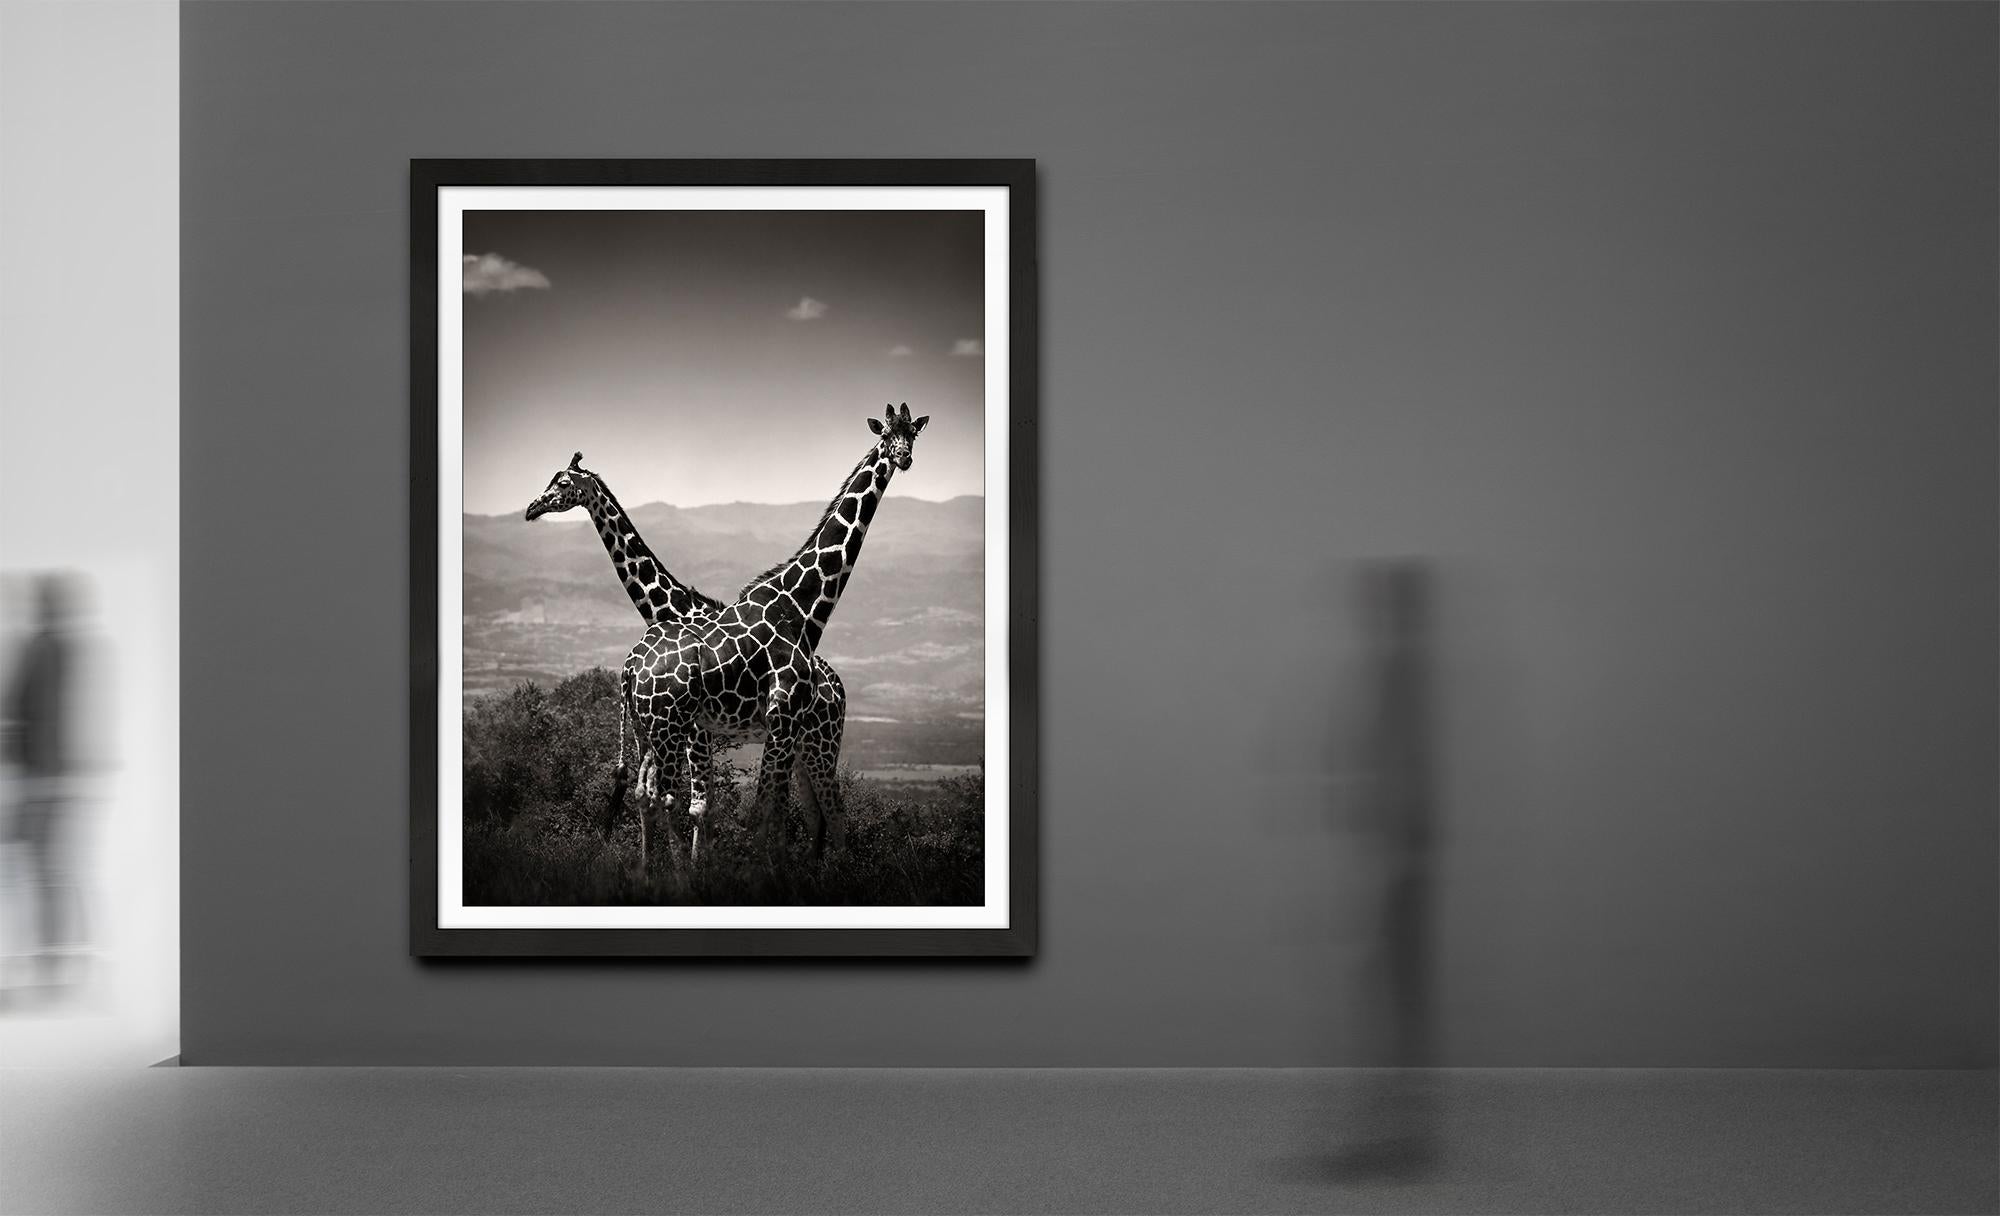 Giraffes couple, animal, wildlife, black and white photography, africa - Photograph by Joachim Schmeisser